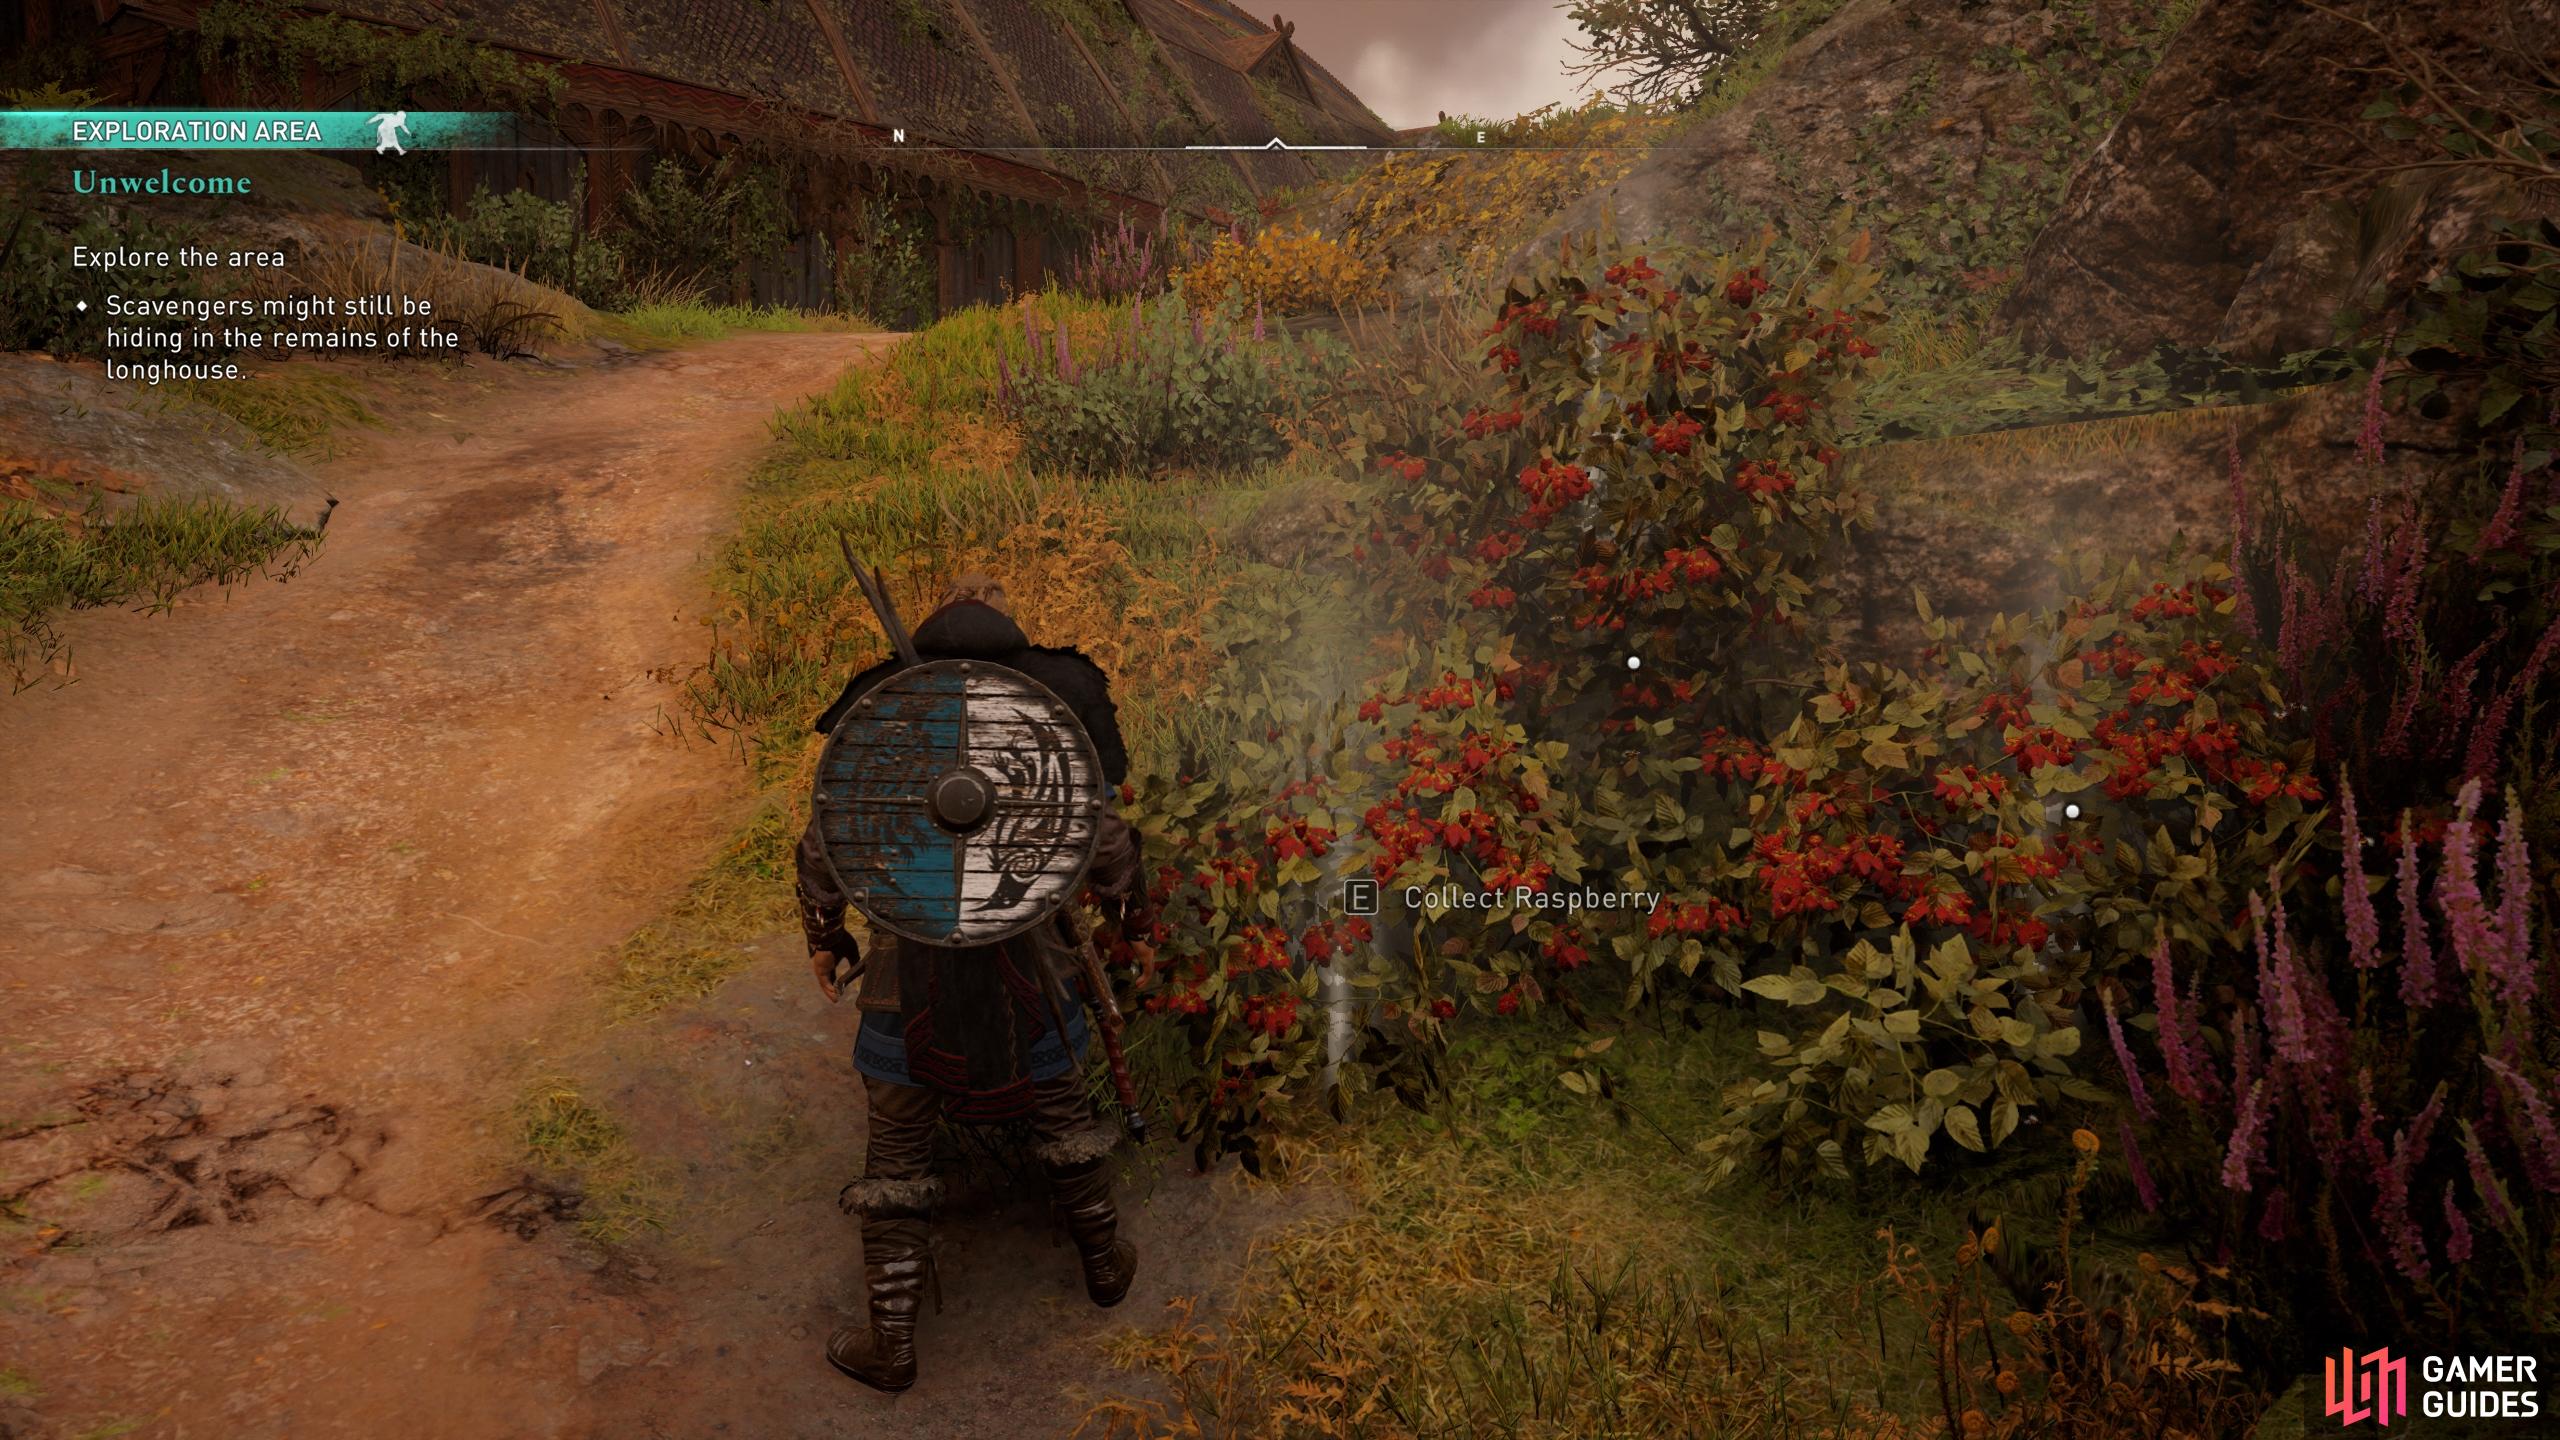 If you need to replenish health during or after the fight, restock on rations from the nearby bushes.